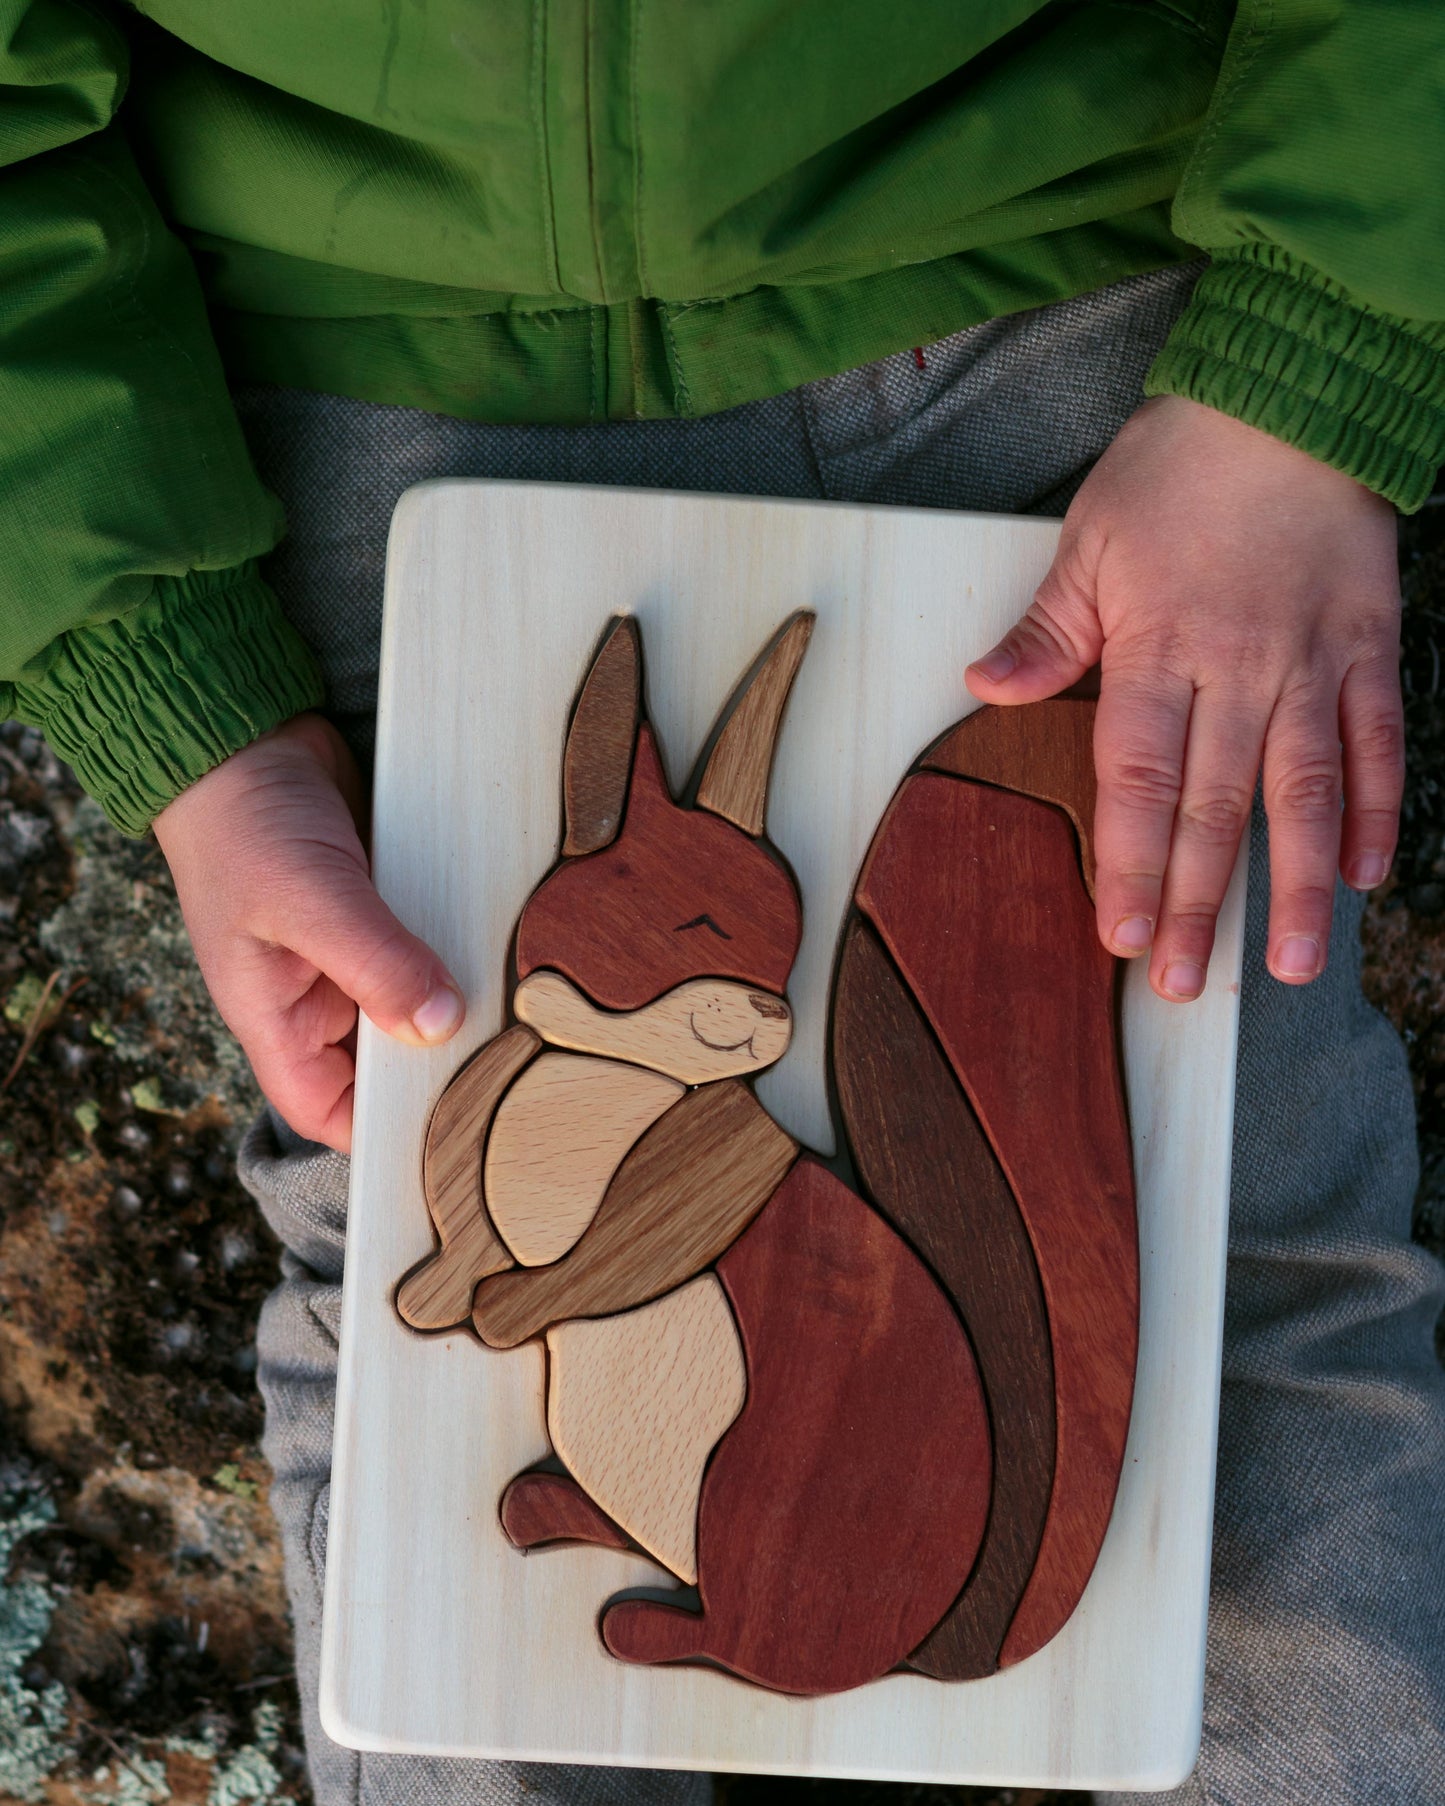 beautiful wooden toy puzzle squirrel from Cocoletes, on a child's lap